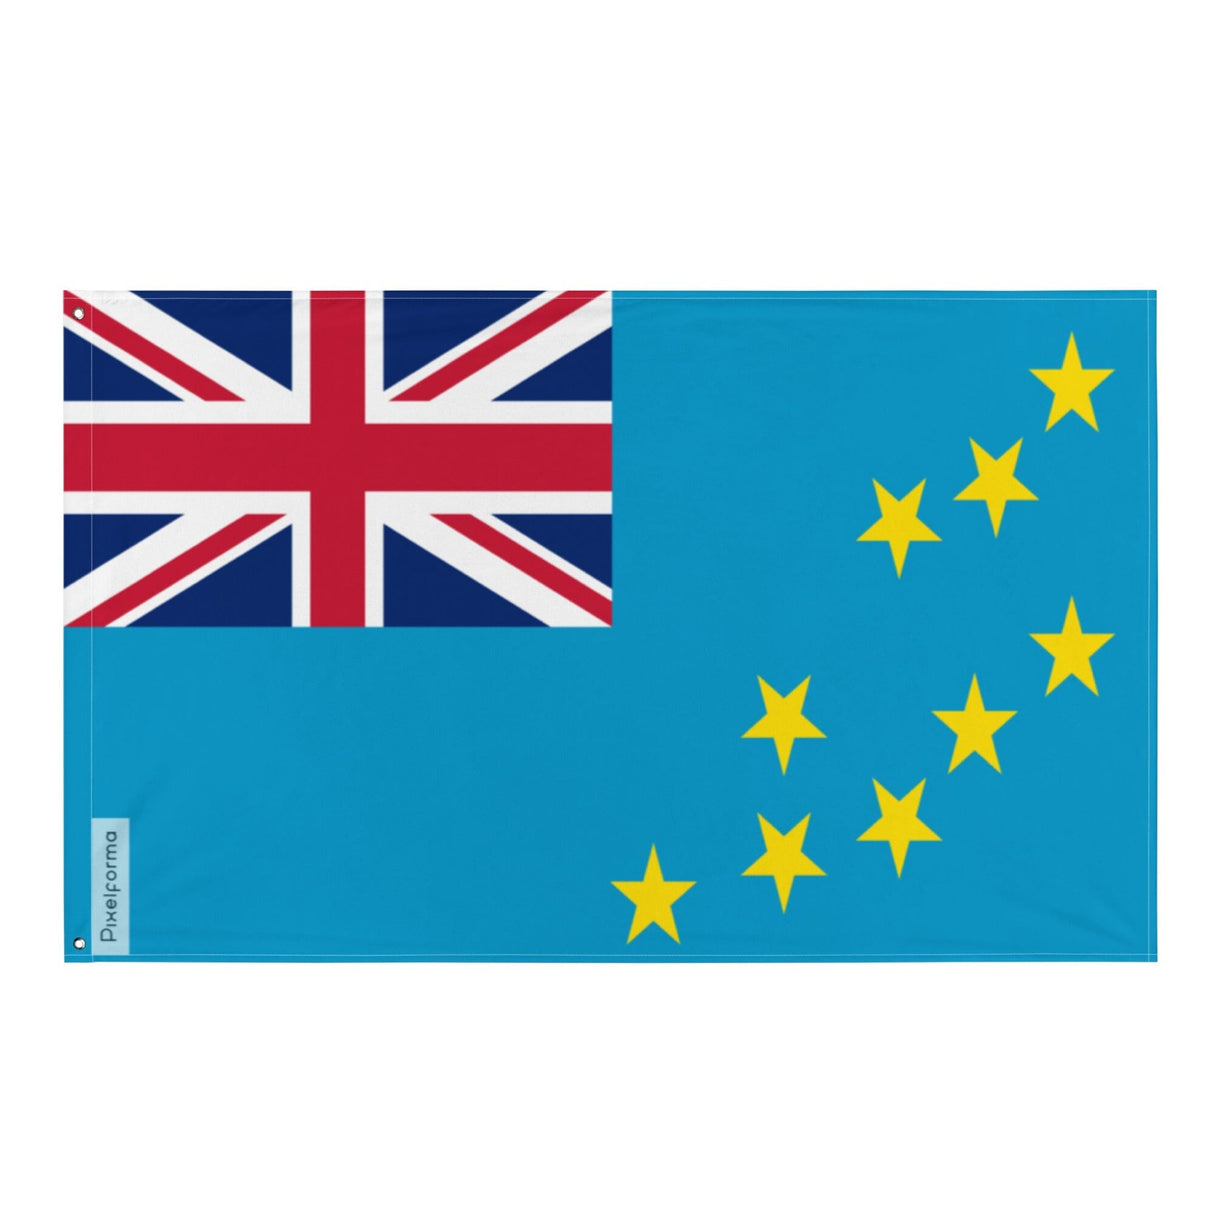 Tuvalu Flag in Multiple Sizes 100% Polyester Print with Double Hem - Pixelforma